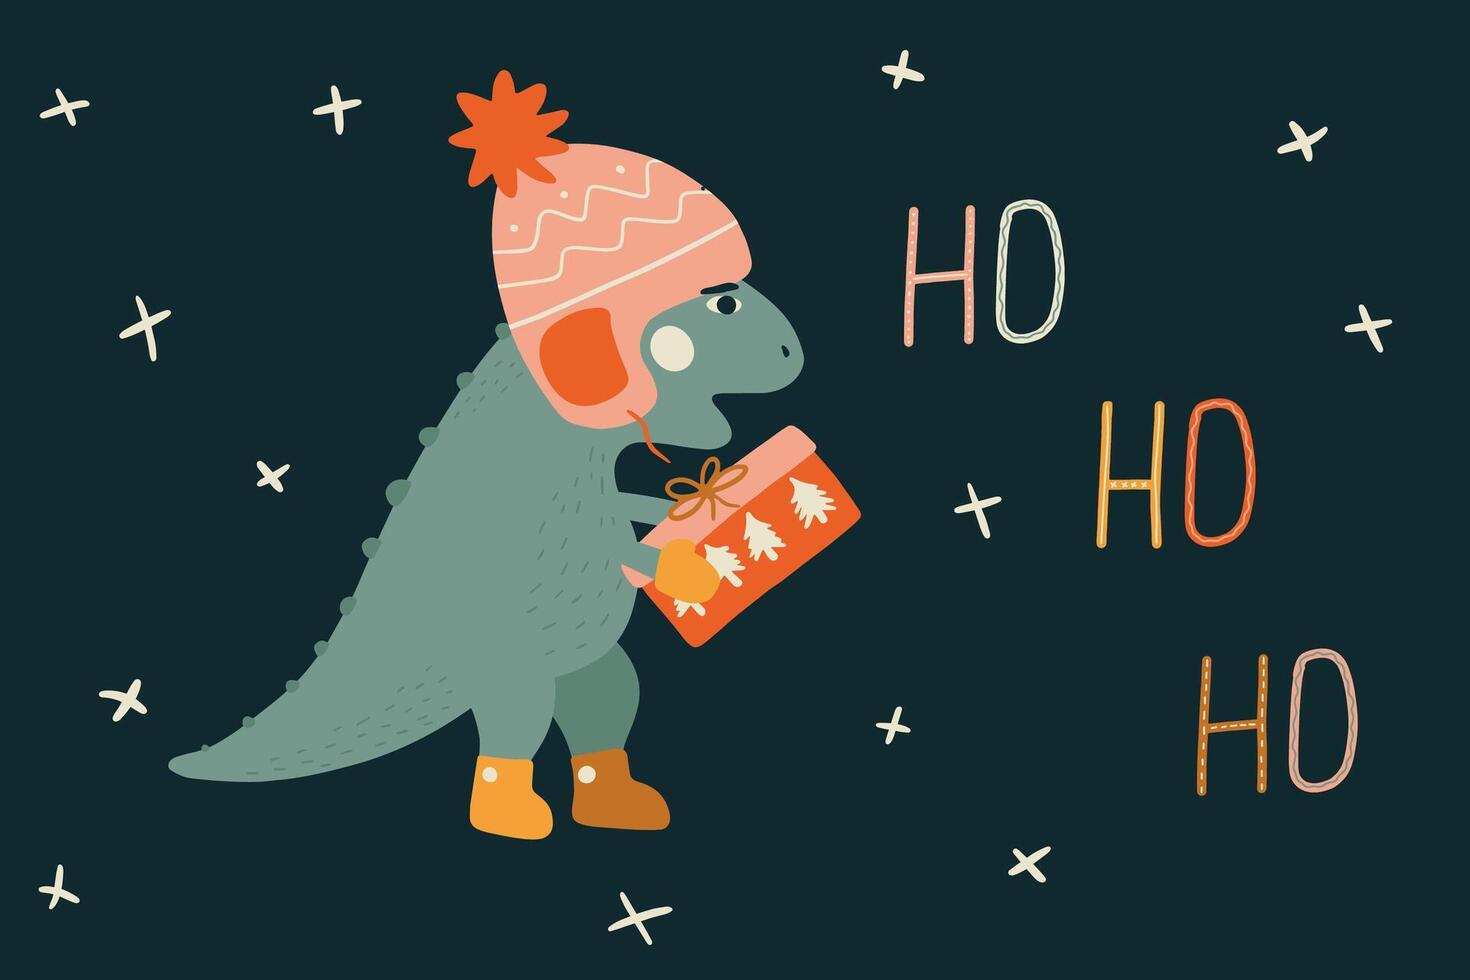 Christmas card with a a little t rex dinosaur. Winter illustration with baby dino in a hat and shoes. Funny character in cartoon hand drawn style. Cute design for greeting card, printing on T-shirt. vector